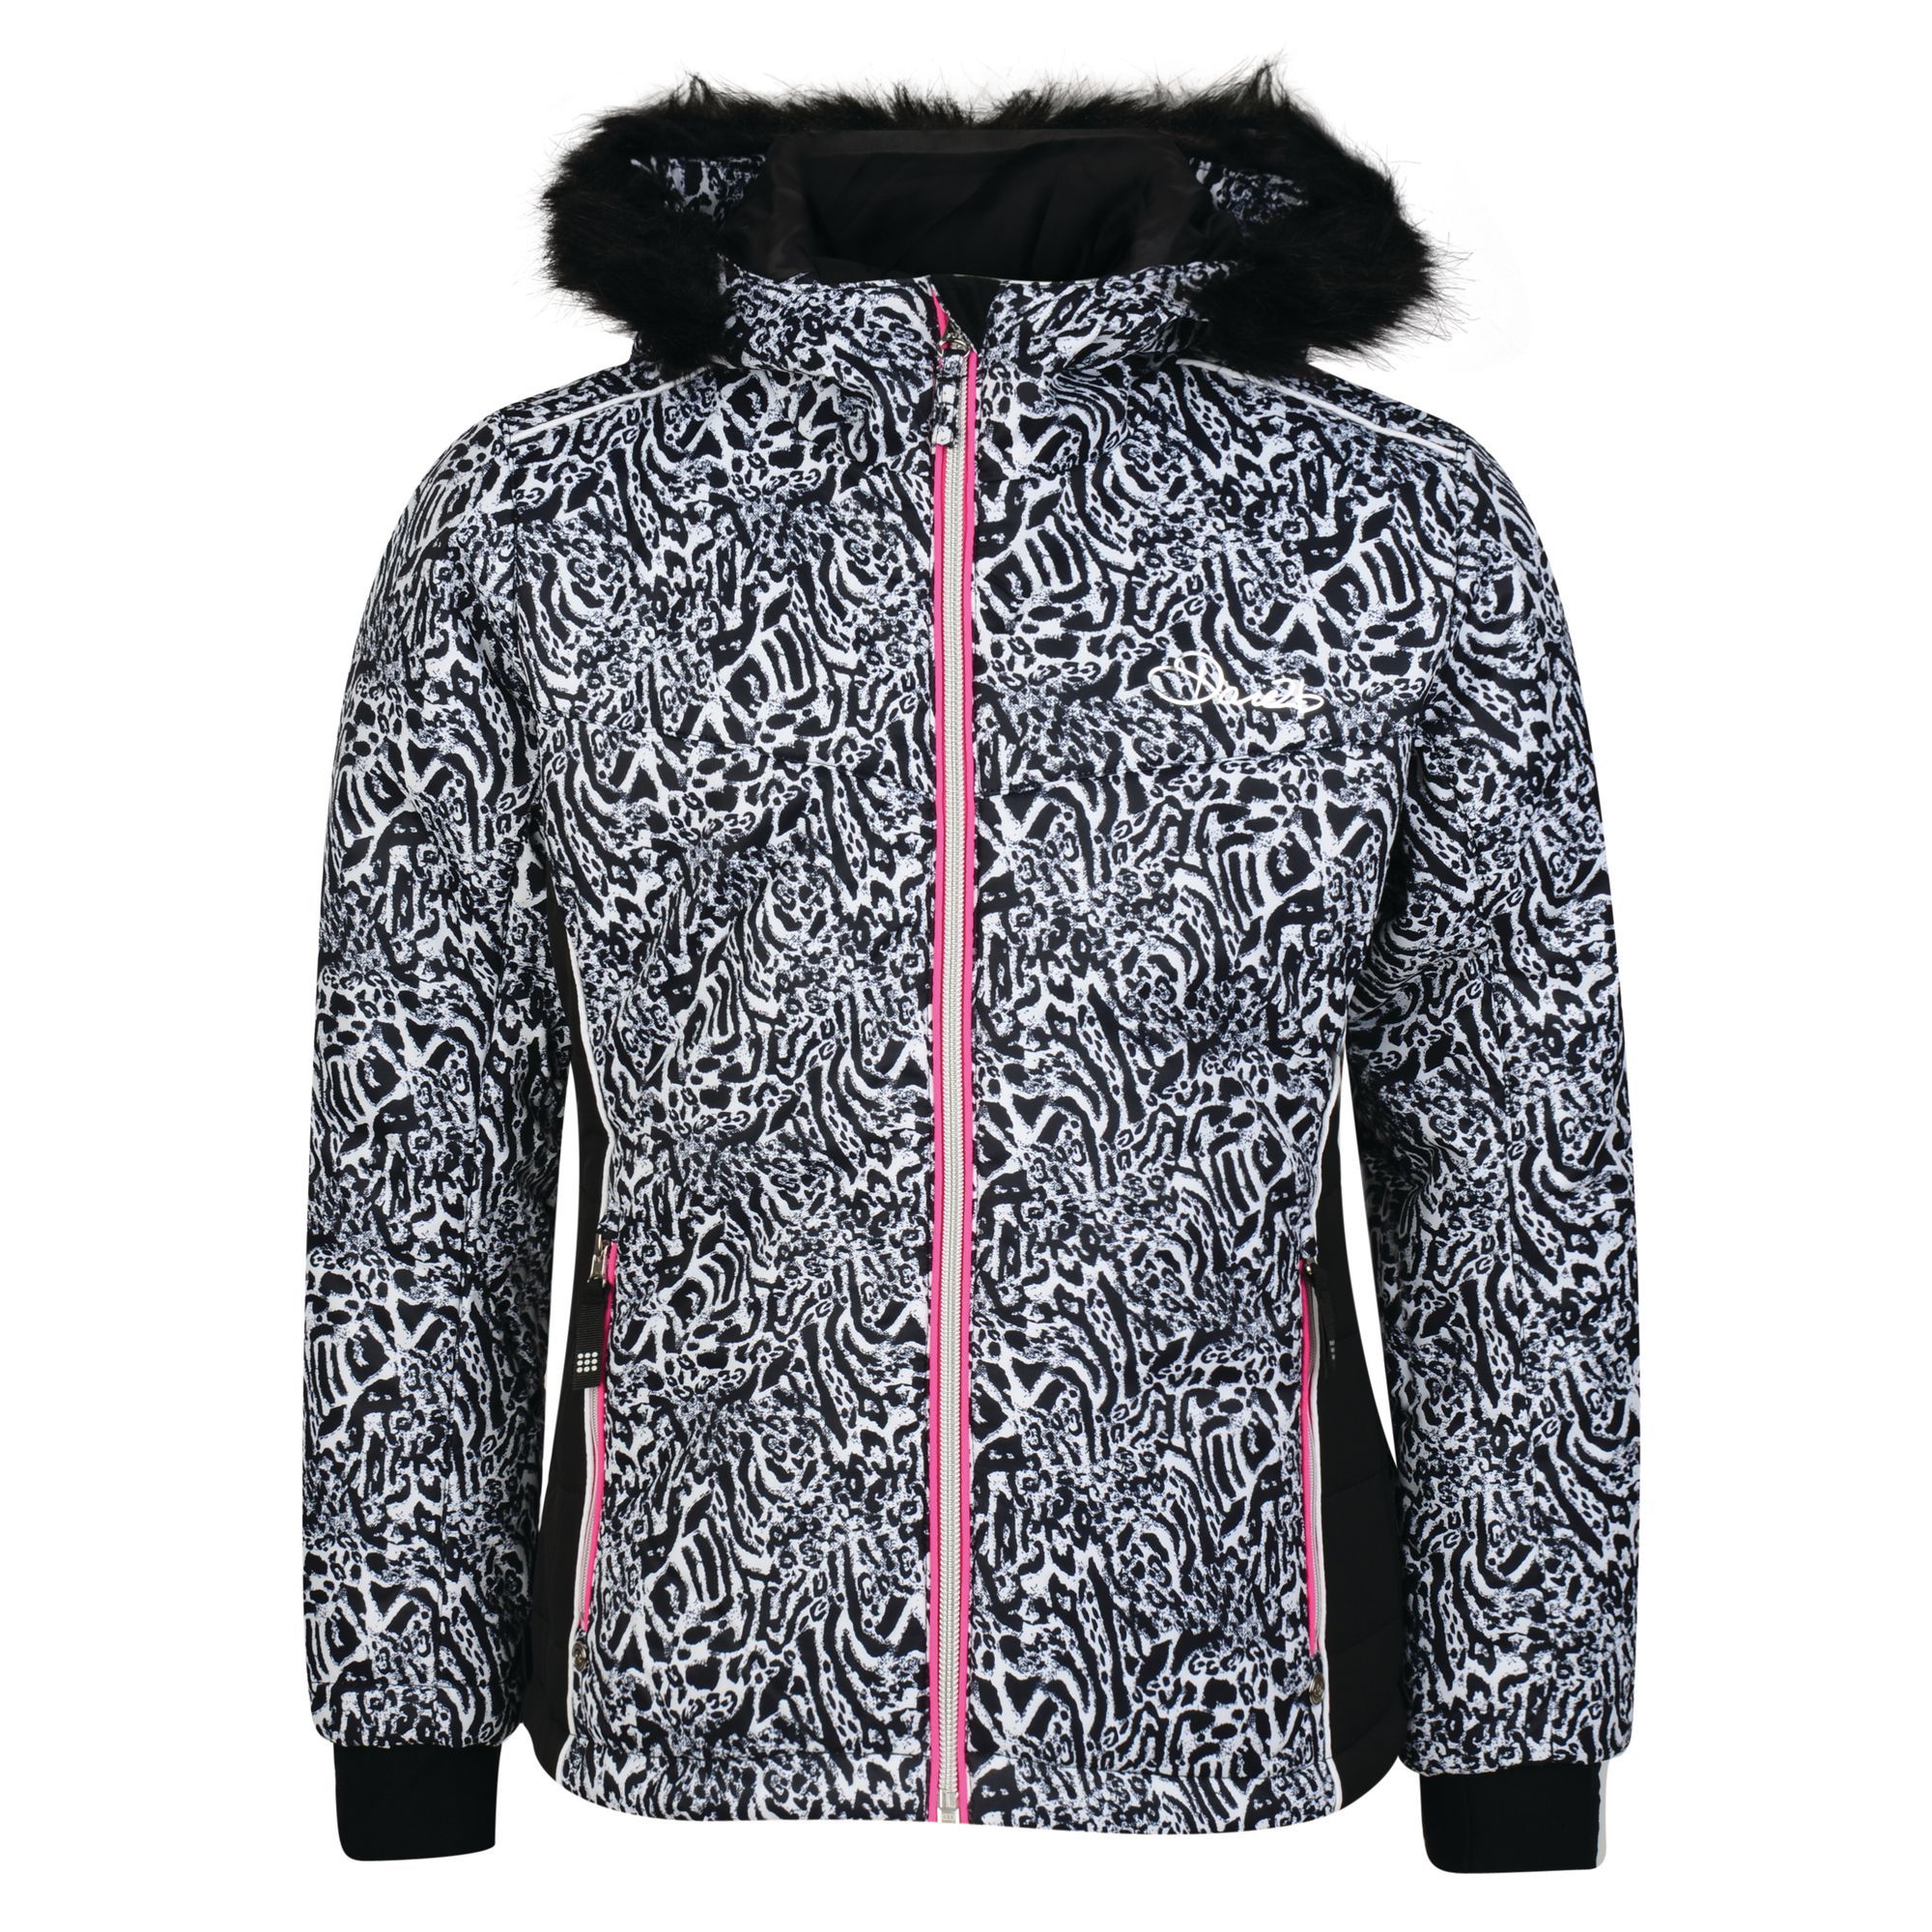 100% Polyester. Luxe girls ski jacket. Made from waterproof/breathable polyester fabric with four-way stretch for aerobic mobility. High warmth, low-bulk bulk insulation. Fine quality faux-fur trimmed hood. Powder blocking snowskirt. Cosy inner stretch cuffs. Zipped pockets, including a mesh google stash.